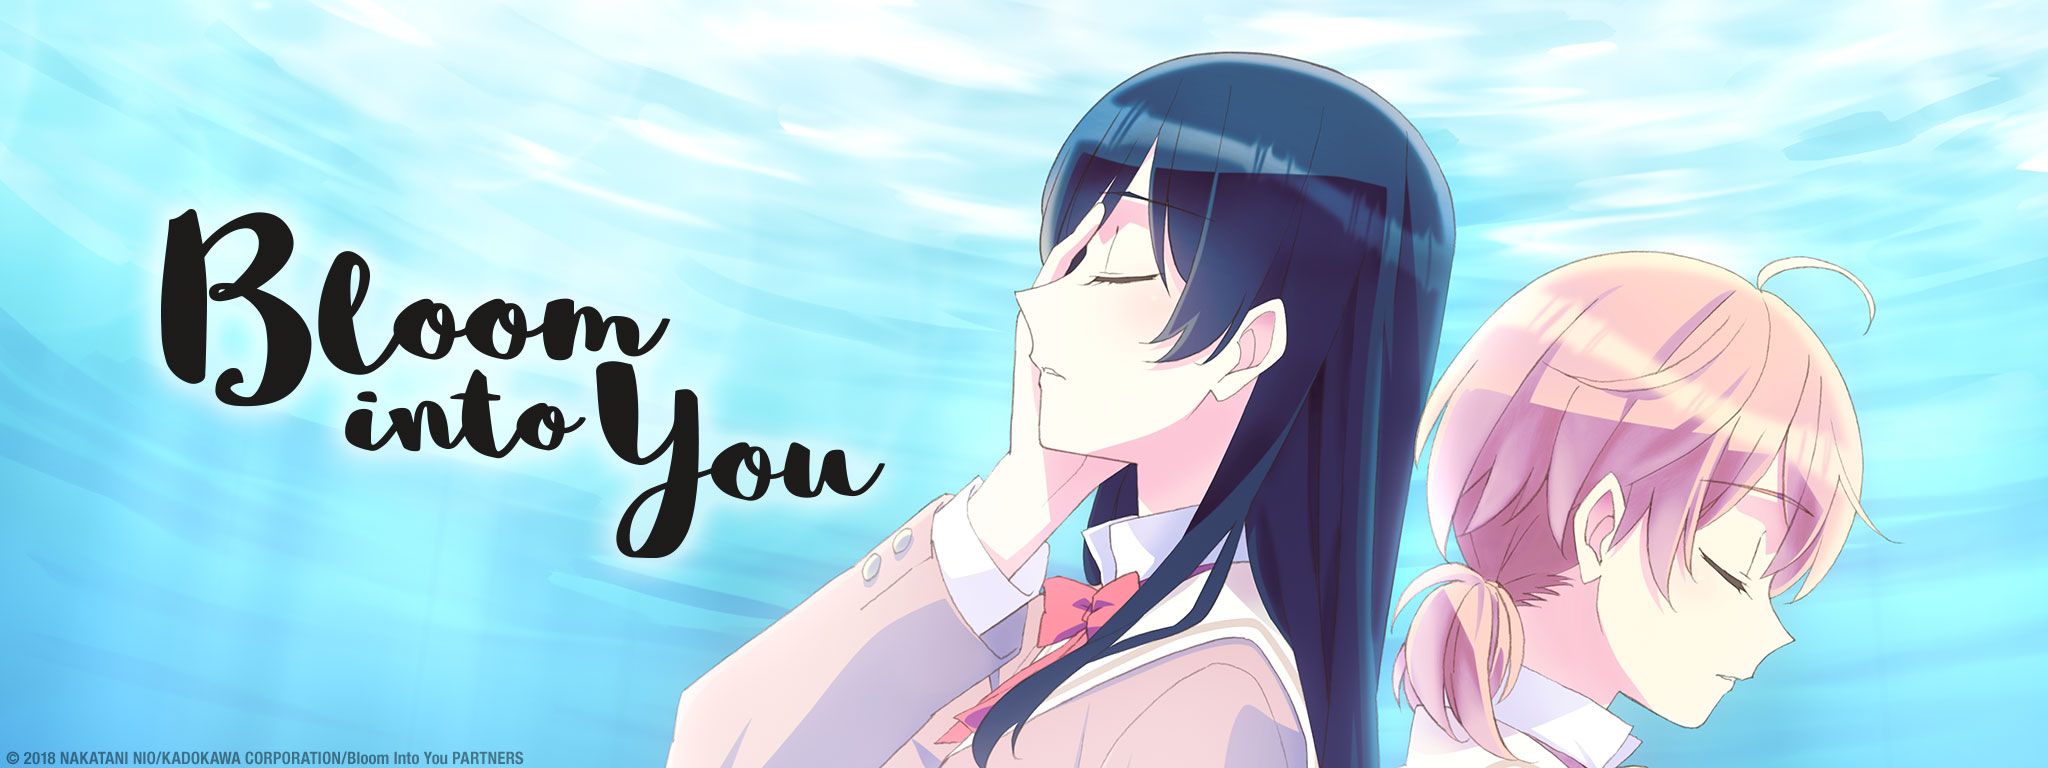 Title Art for Bloom Into You